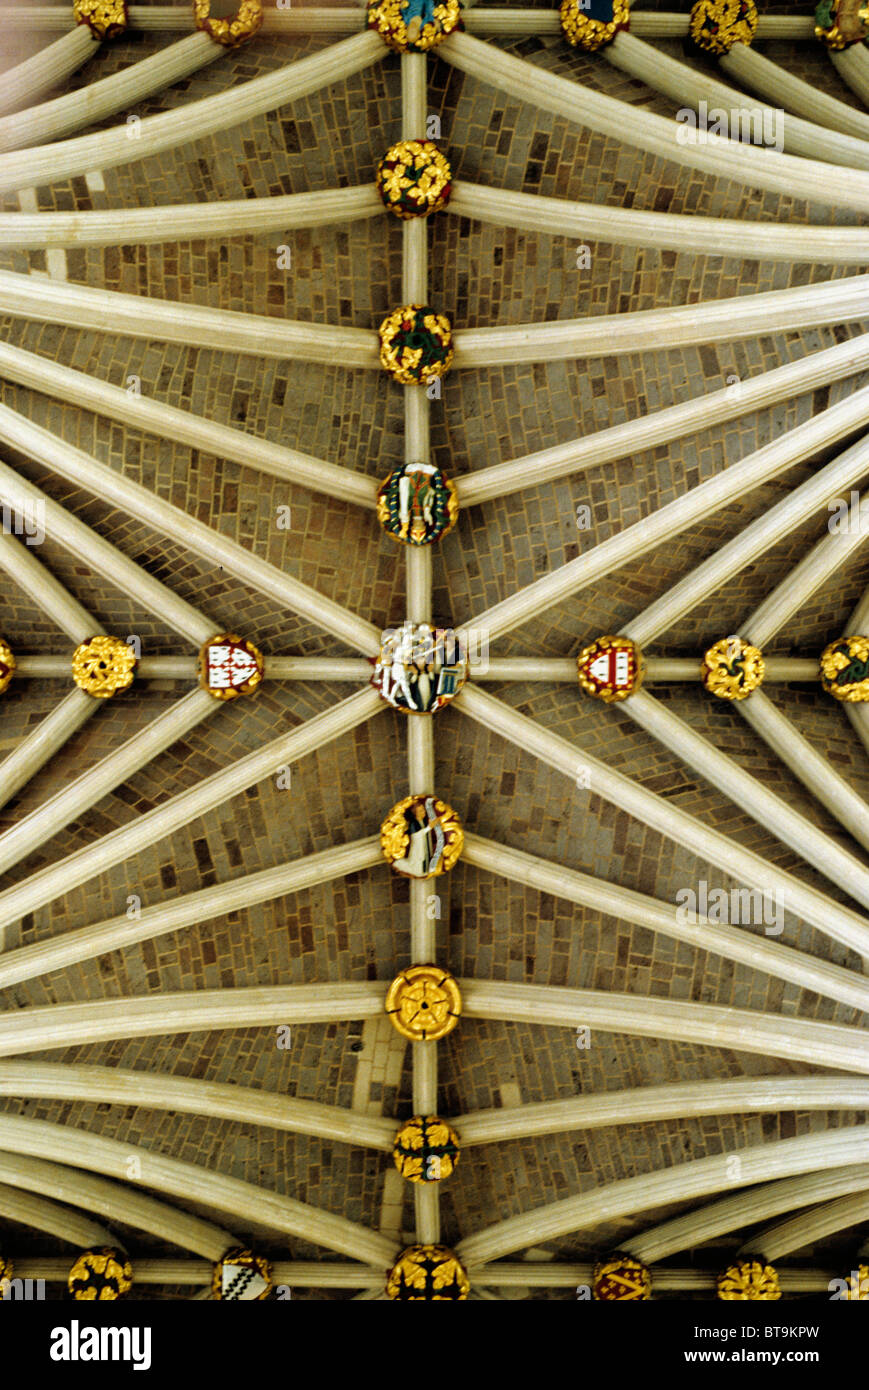 England UK English medieval cathedrals boss rib ribs interior interiors vaults Exeter Cathedral nave roof bosses and vault Devon Stock Photo